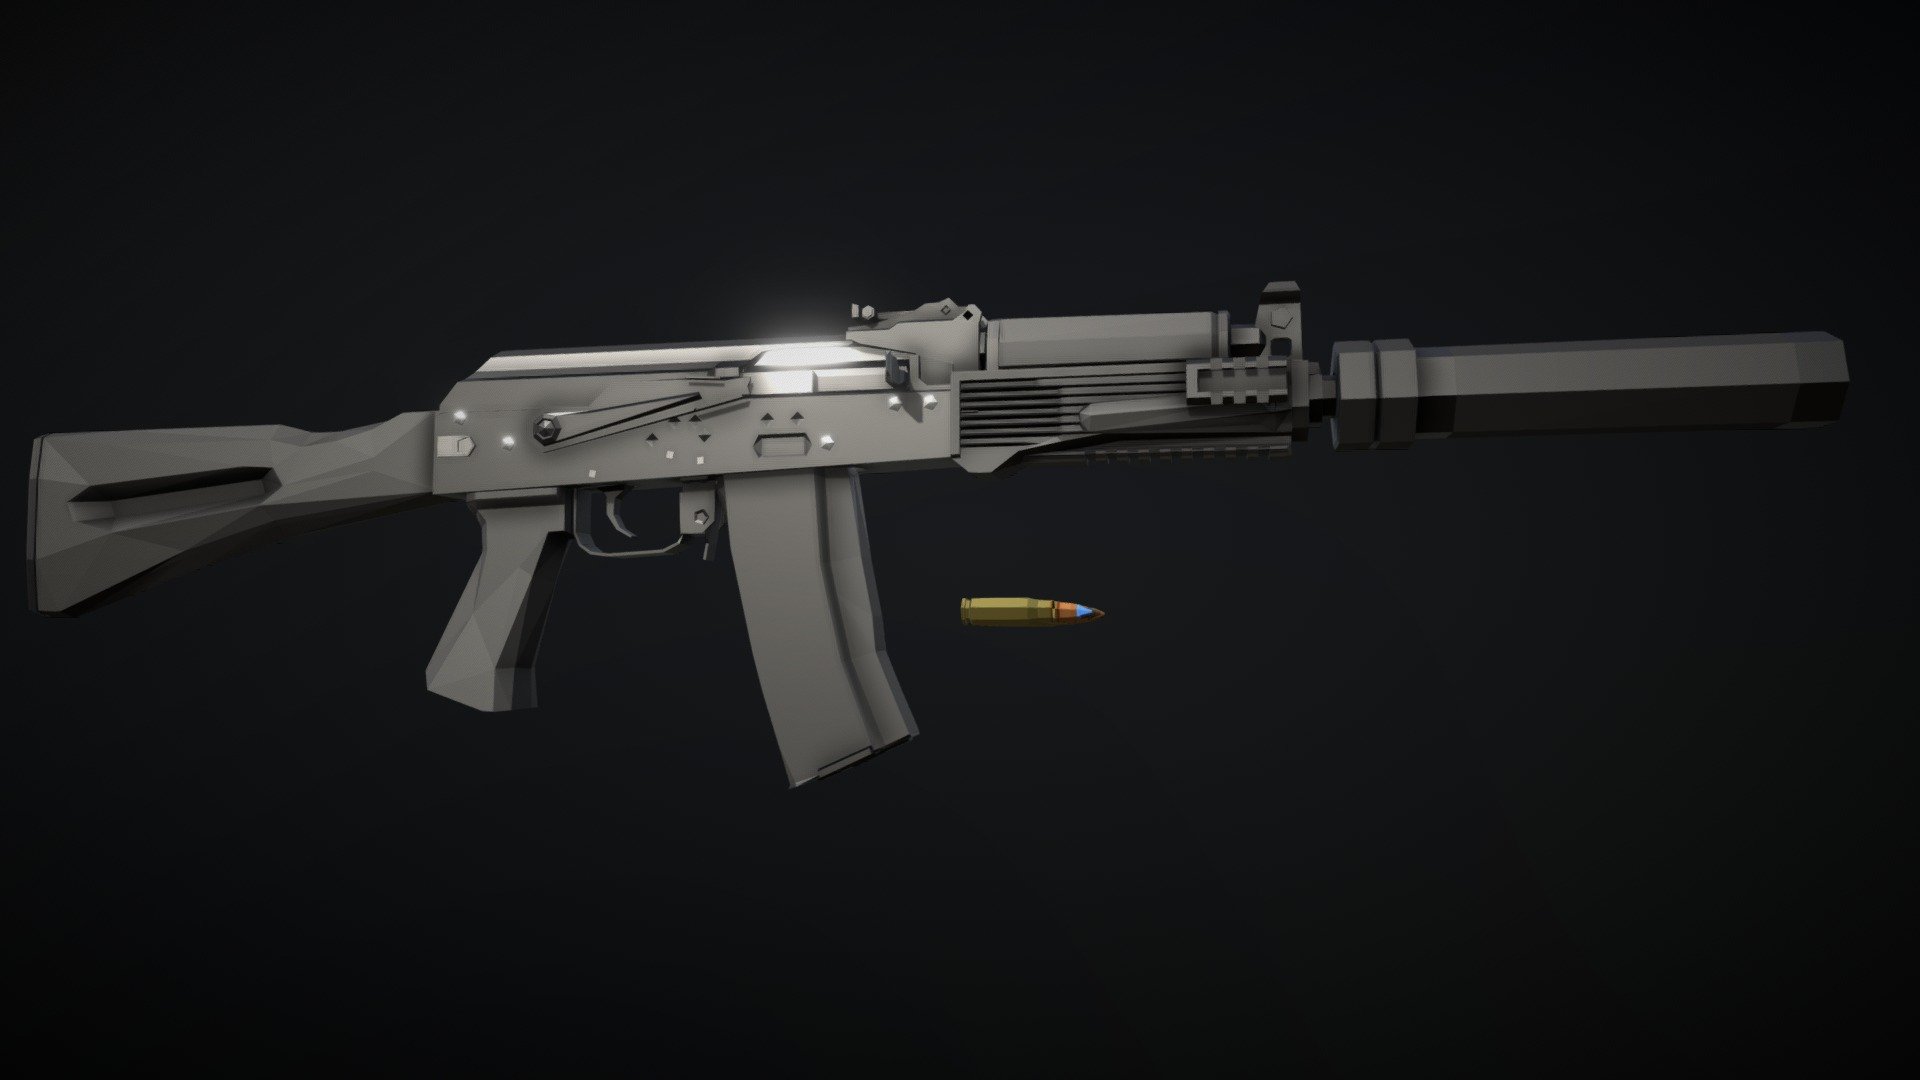 Low-Poly model of an AK-9, part of the 100-series of AK rifles, a carbine chambered in 9x39mm. Apologies for any inaccuracies in the model, I already went further than I would have wanted while trying to gather information about this.

also, I think I should explain the ammo types included in this:
there is one standard cardtridge (&ldquo;normal